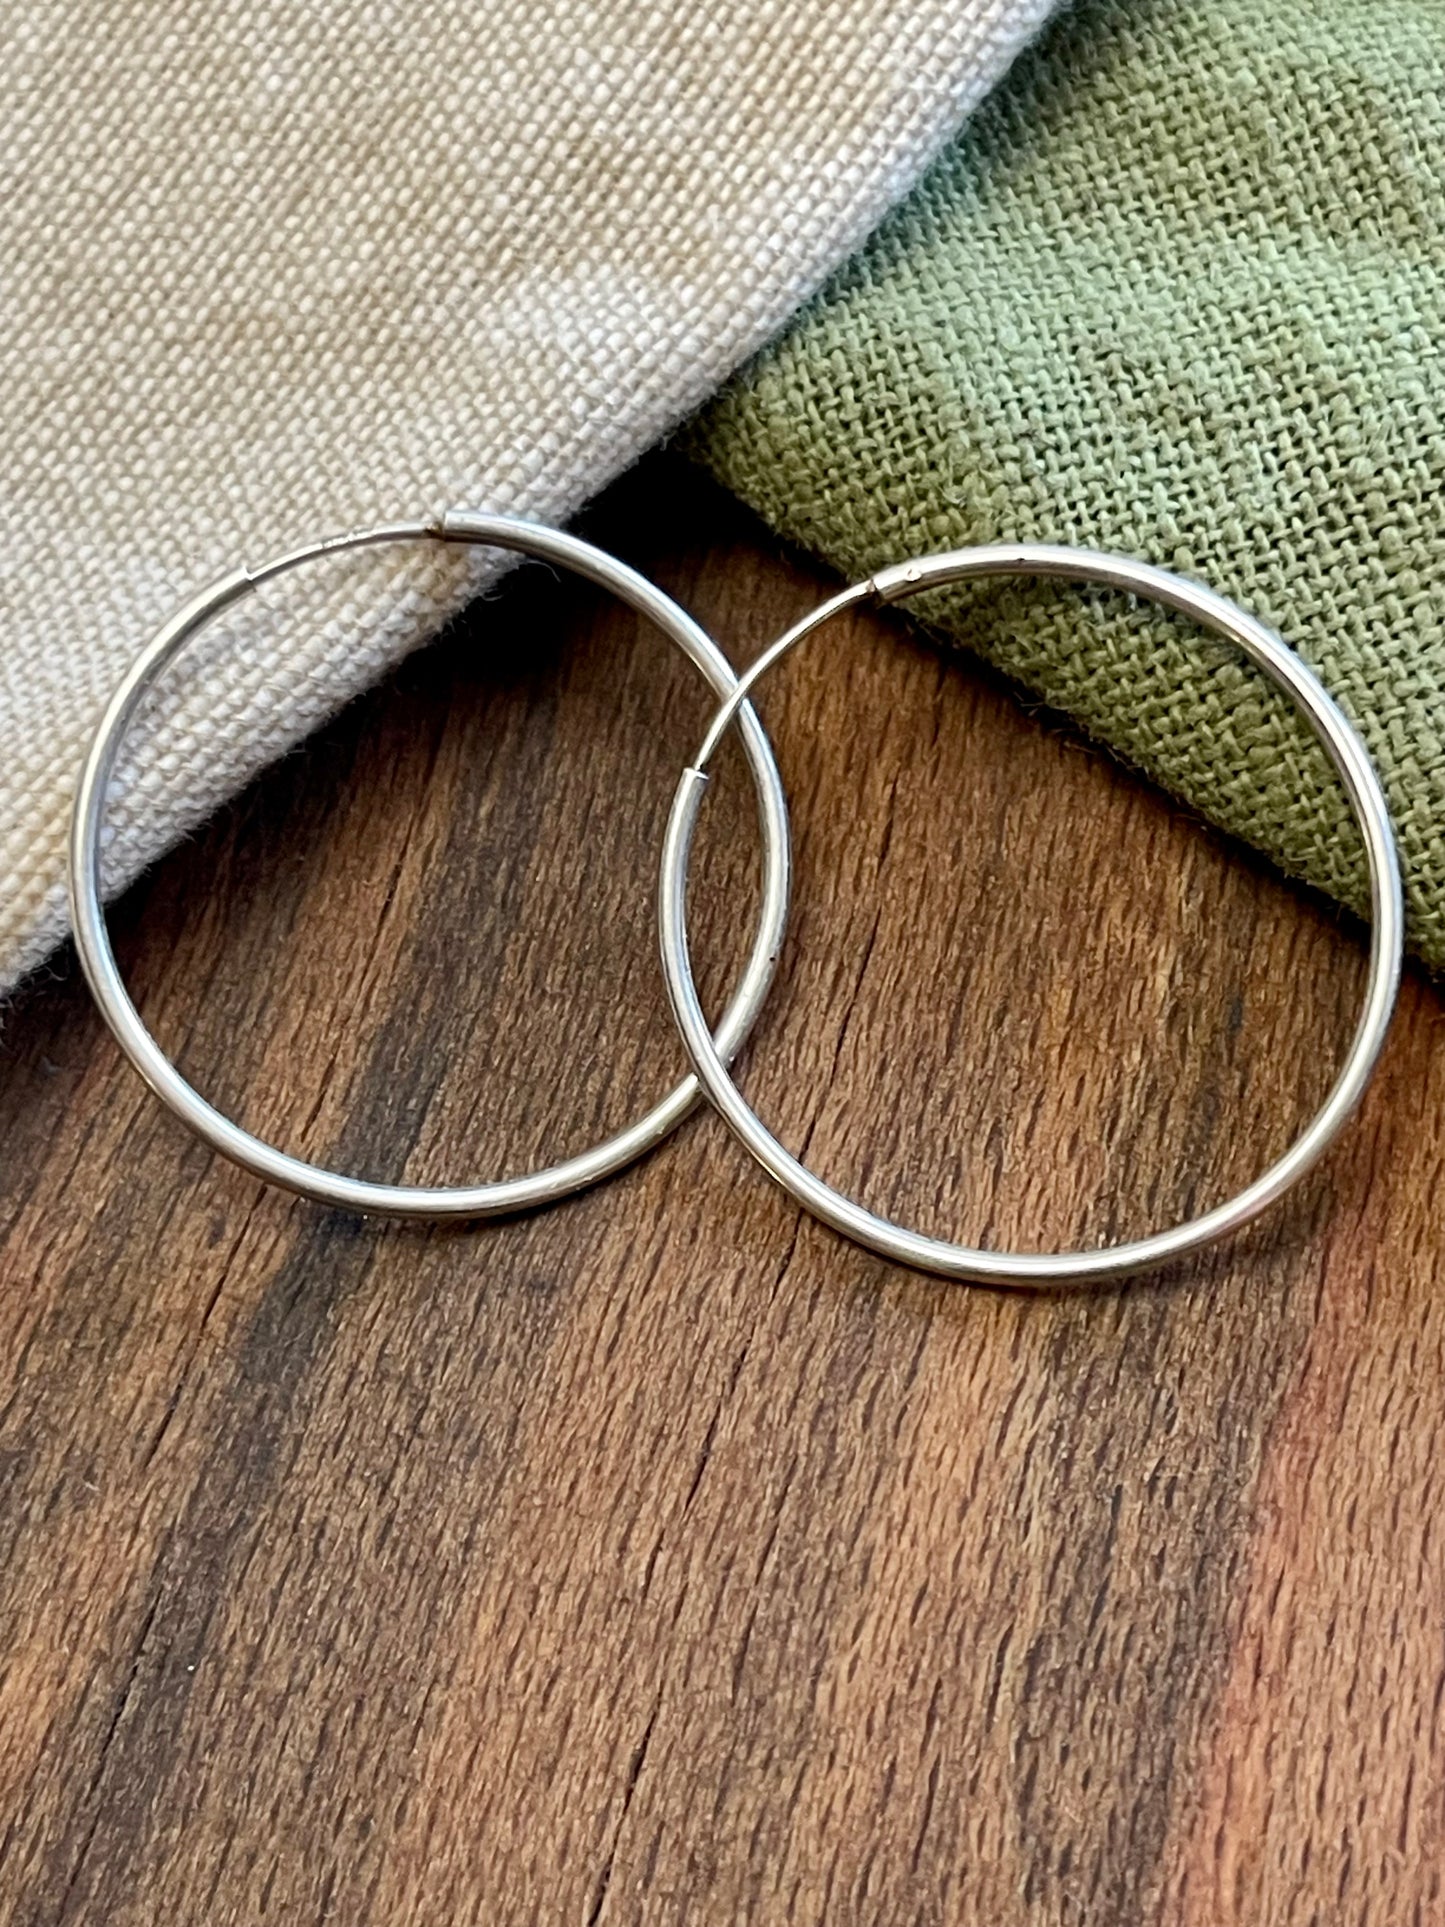 Nice Plain Circle Round Hoops Earrings Solid Sterling 925 Silver Vintage Jewelry